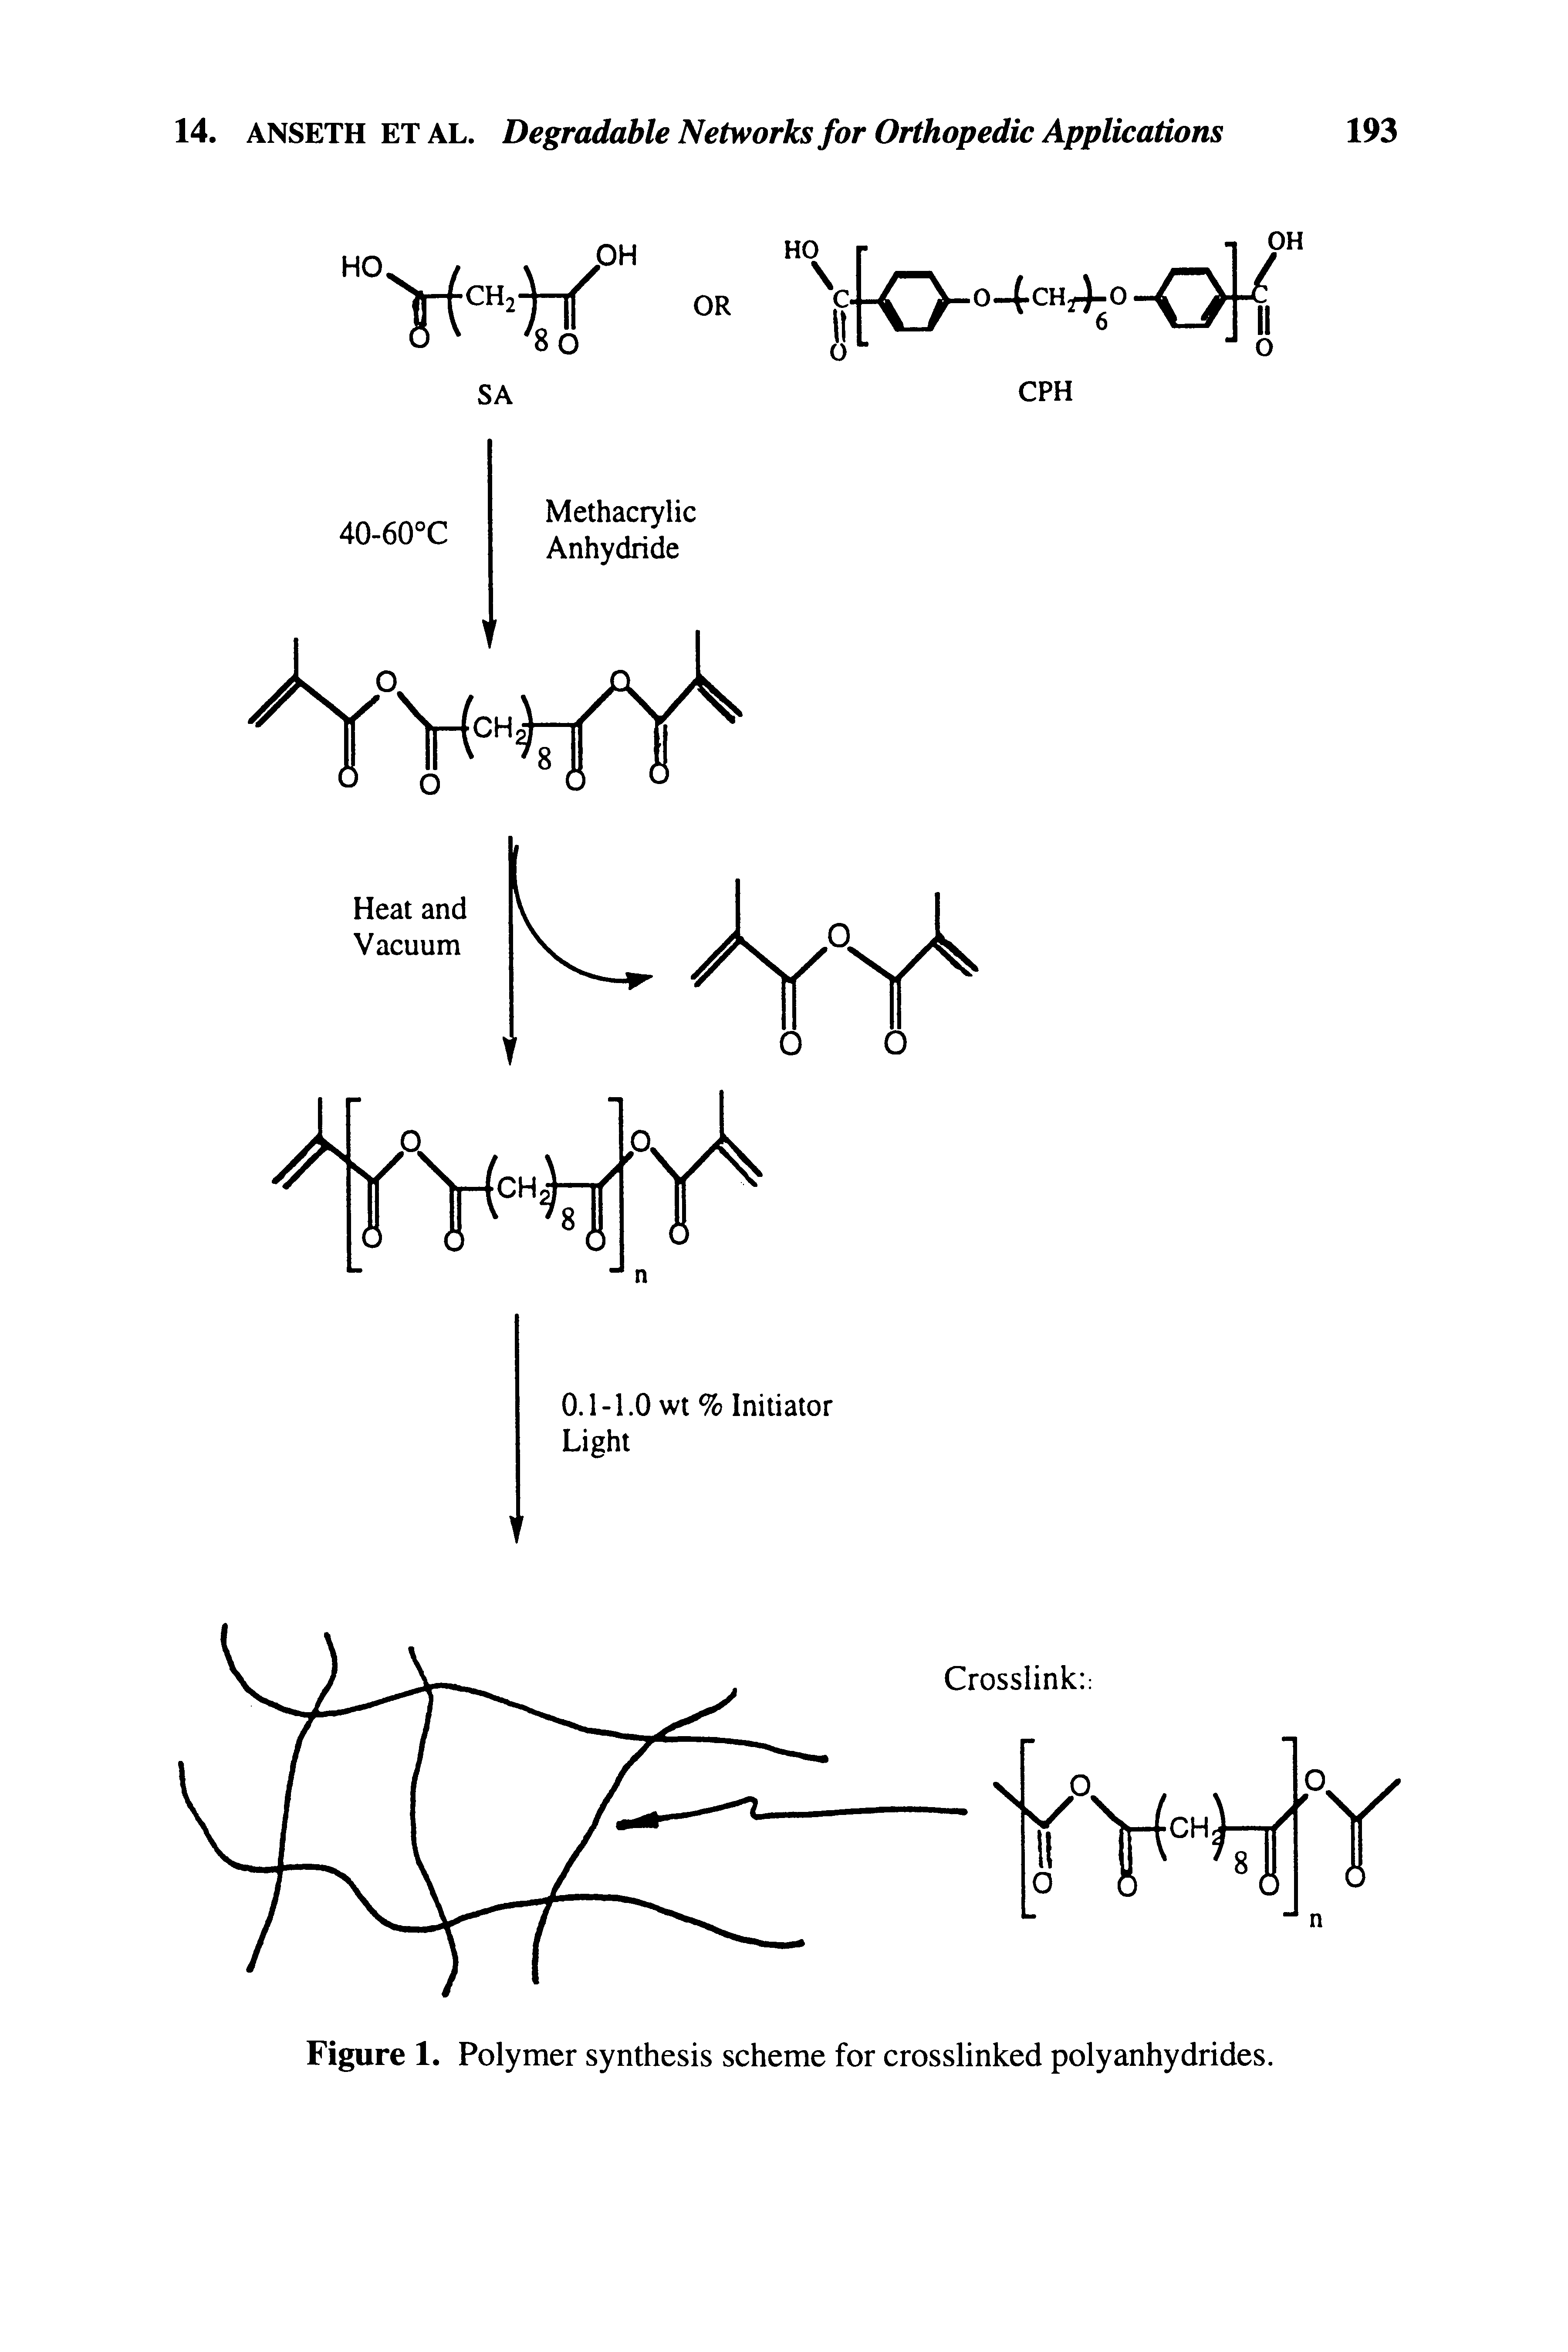 Figure 1. Polymer synthesis scheme for crosslinked poly anhydrides.